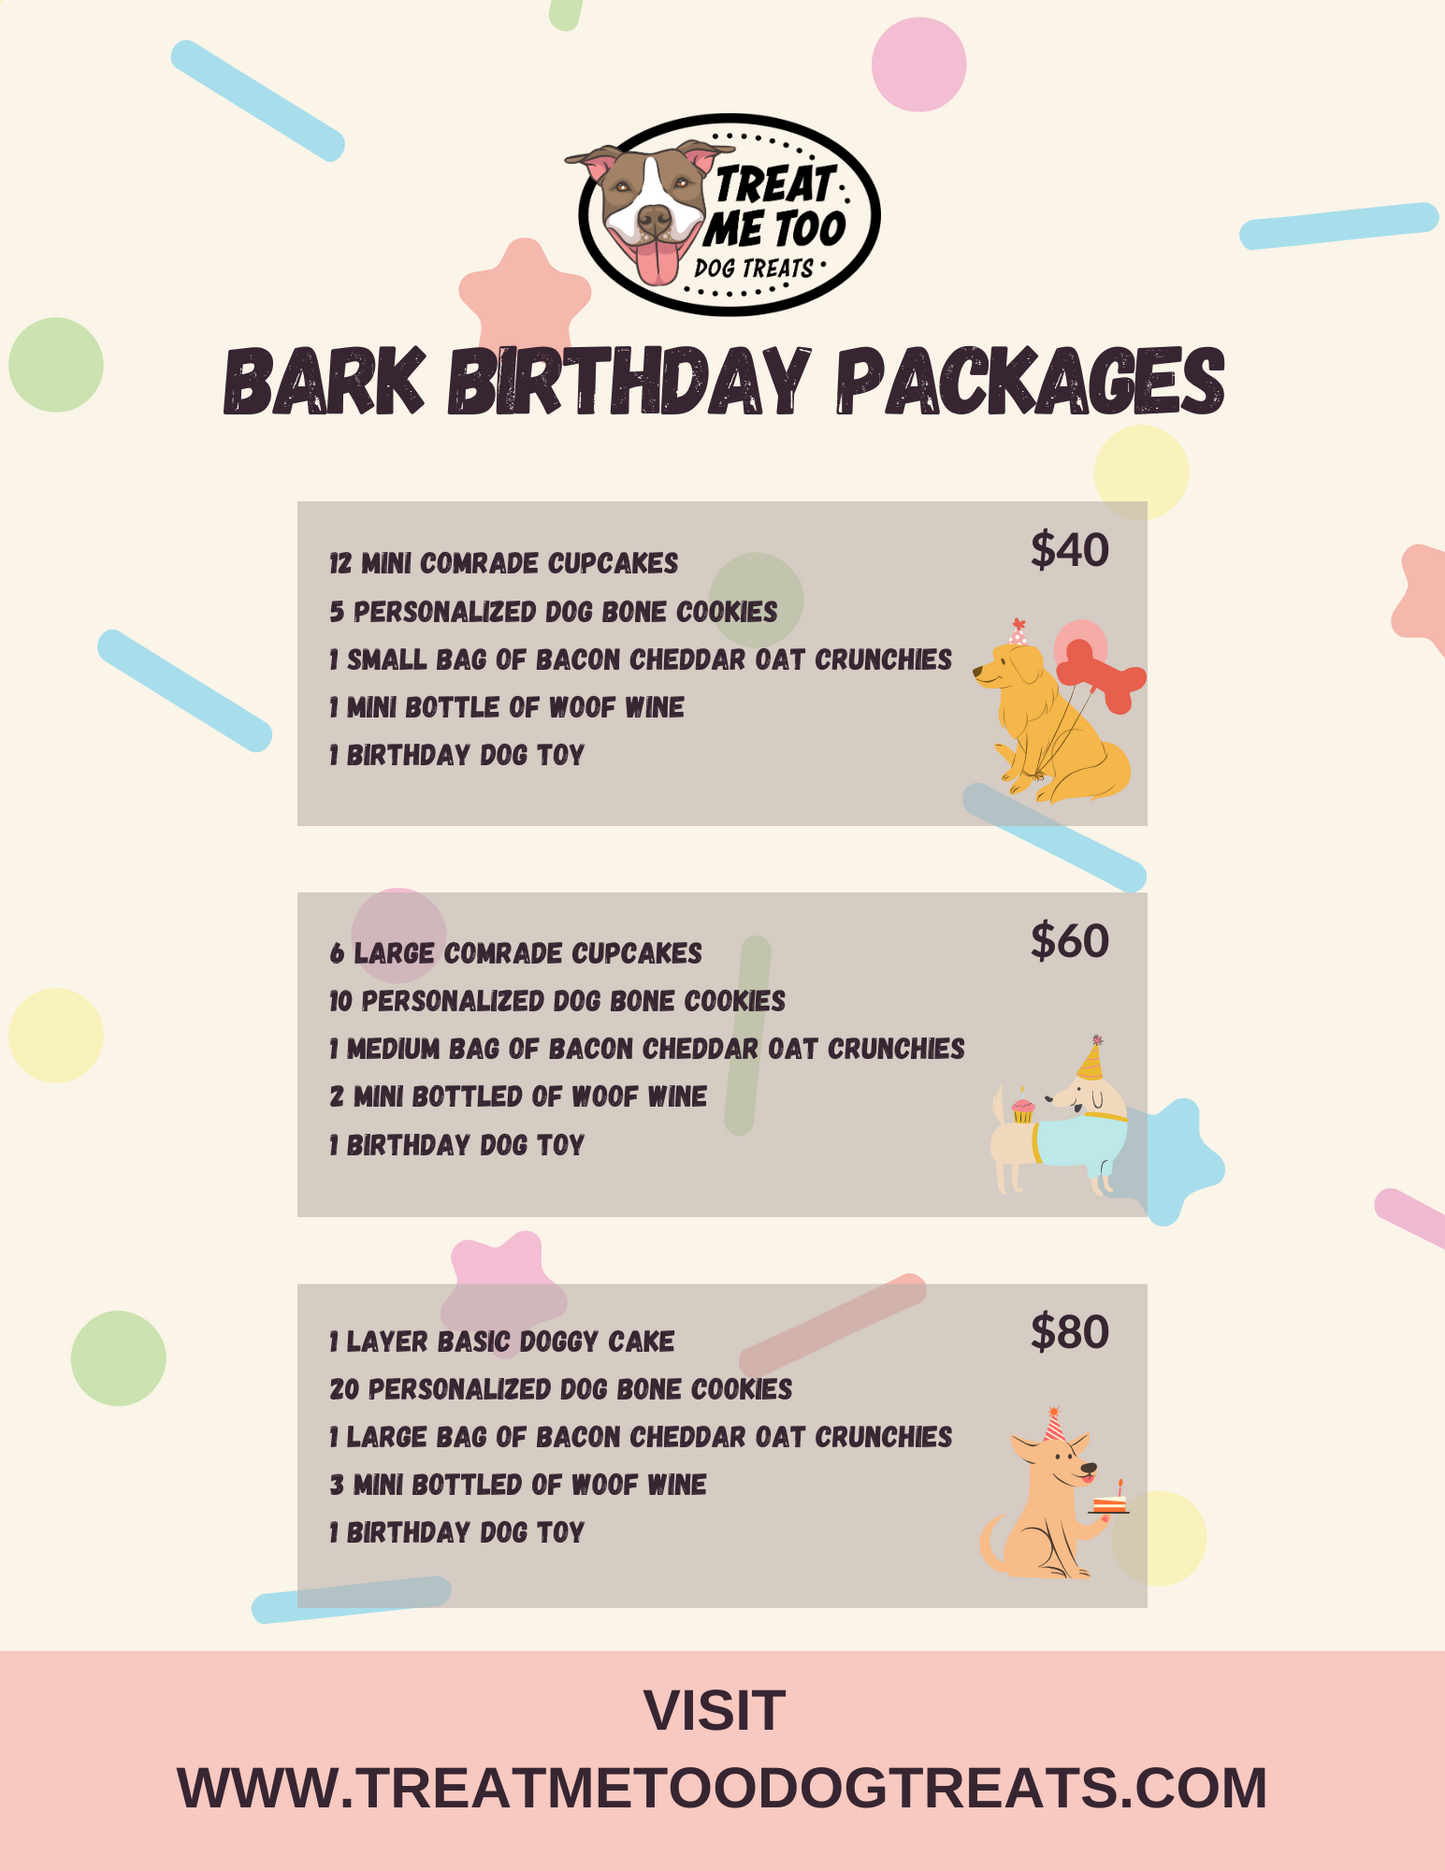 Bark Birthday Packages